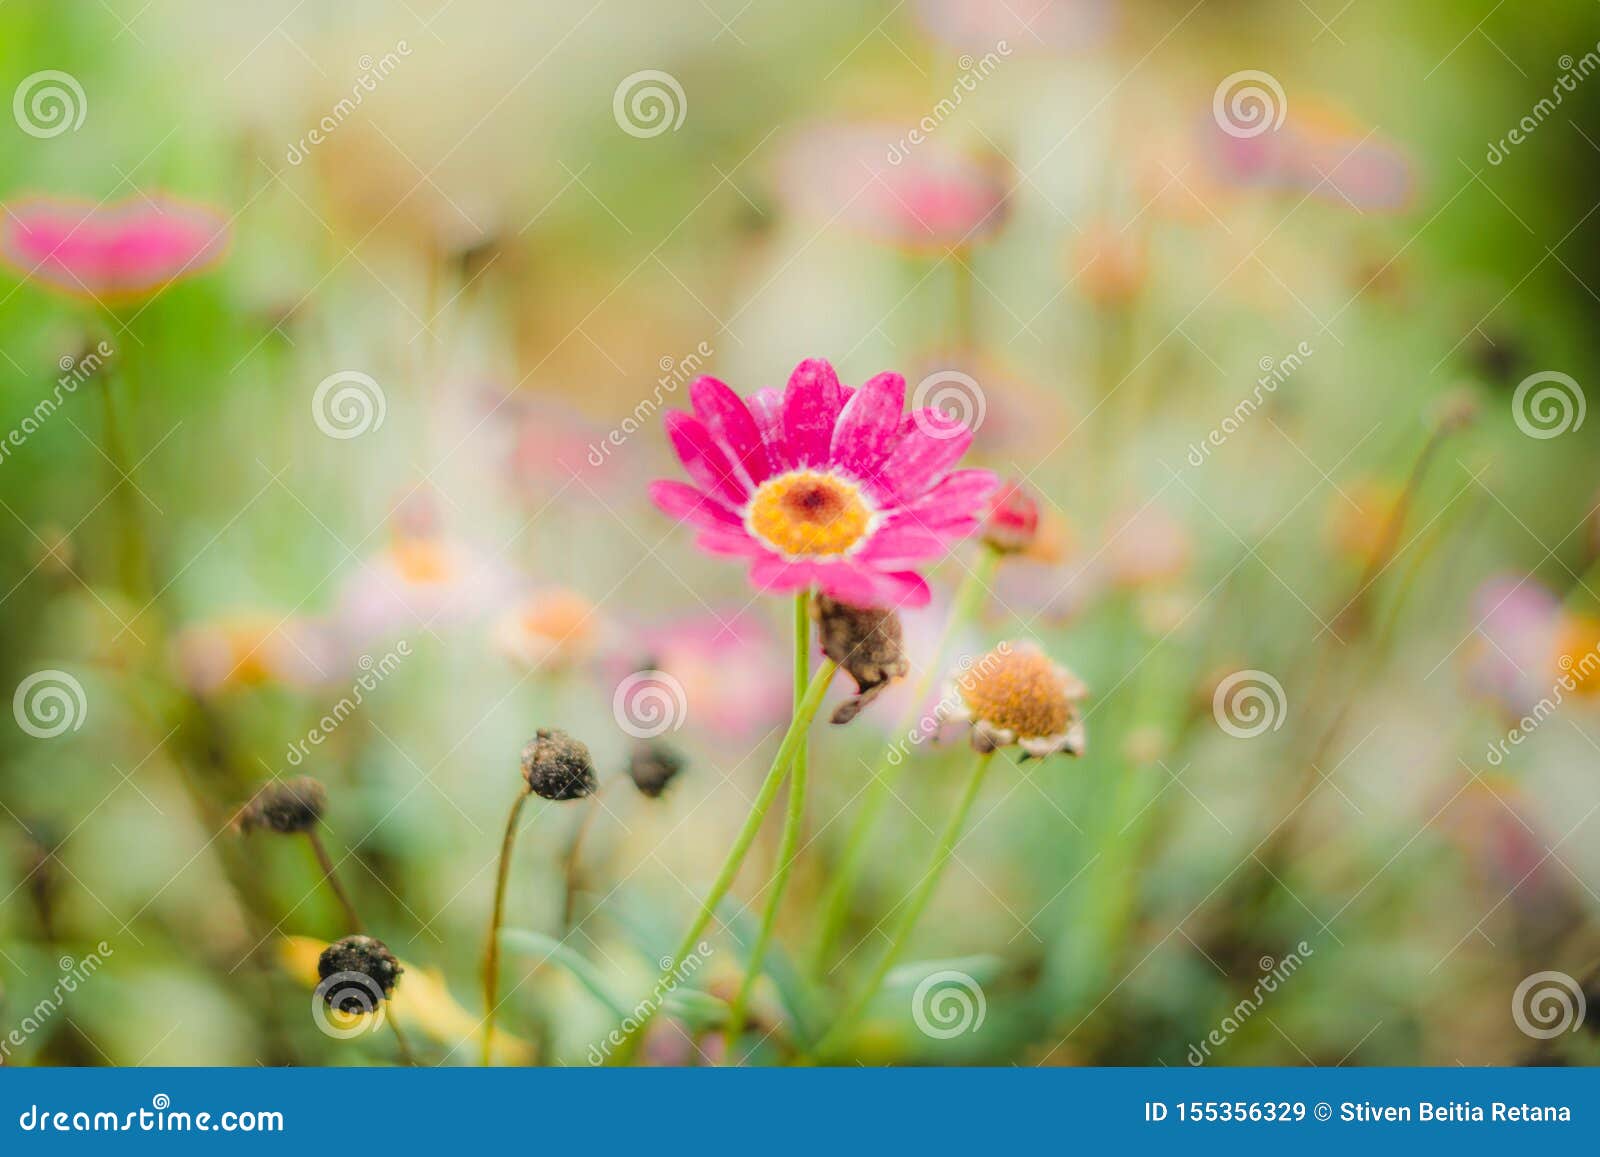 pink flowers and macro vegetation in the forest